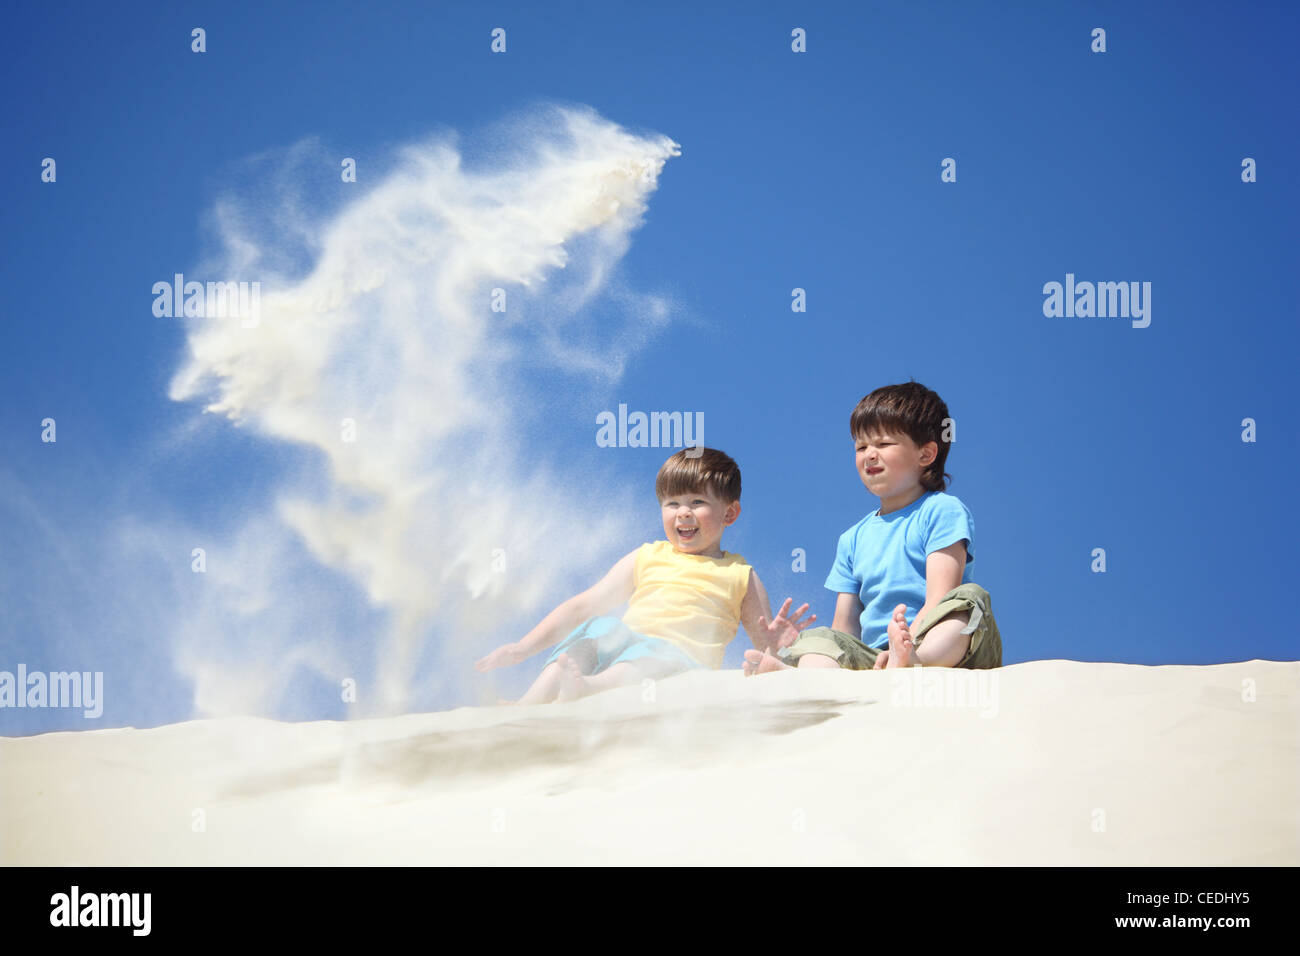 two boys sit on sand and scatter it Stock Photo